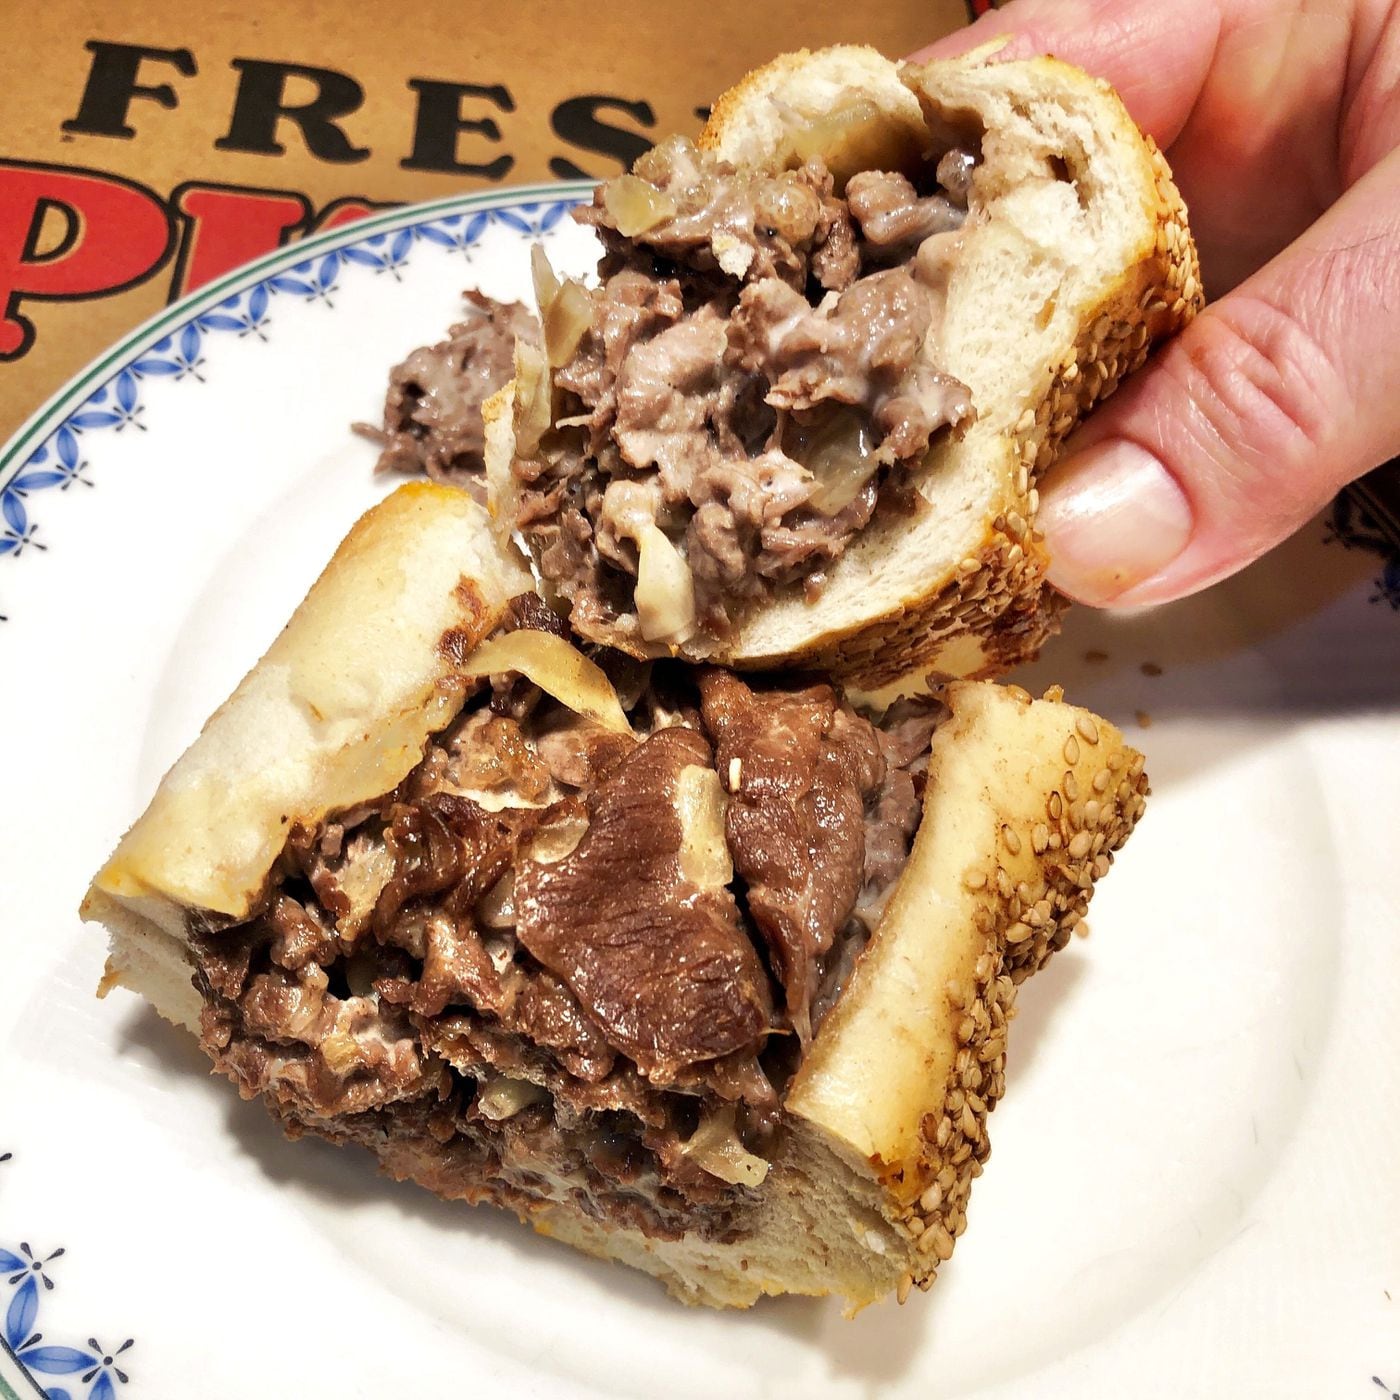 This Don Cheech's cheesesteak at Cafe Carmela is made with sliced ribeye, onions and Cooper Sharp cheese, and is one of the best cheesesteaks around.